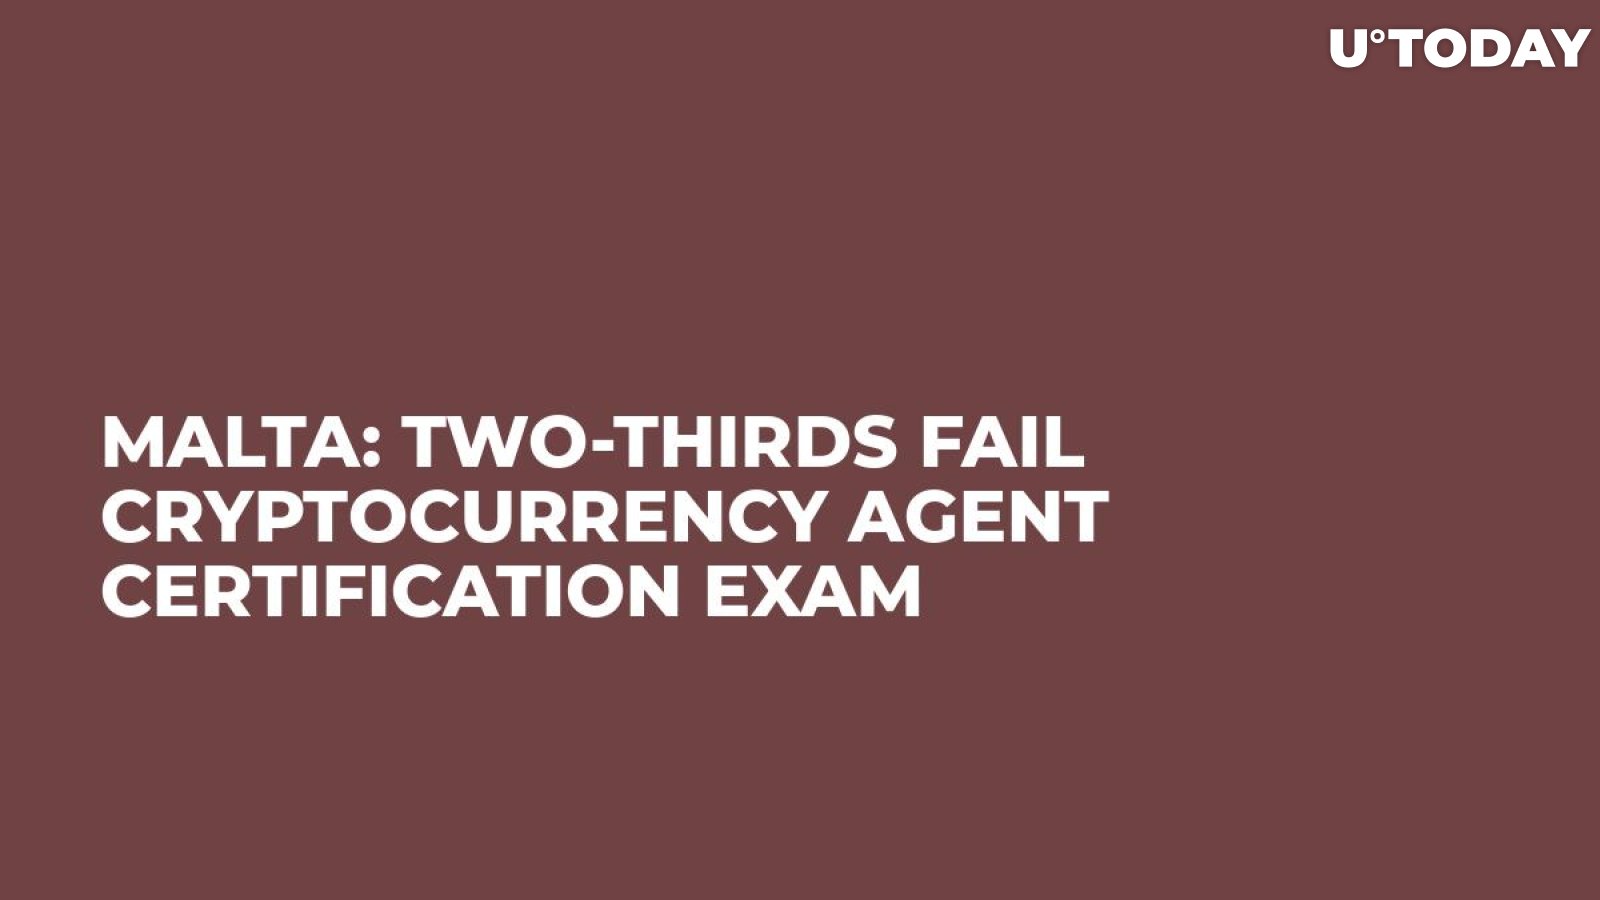 Malta: Two-Thirds Fail Cryptocurrency Agent Certification Exam